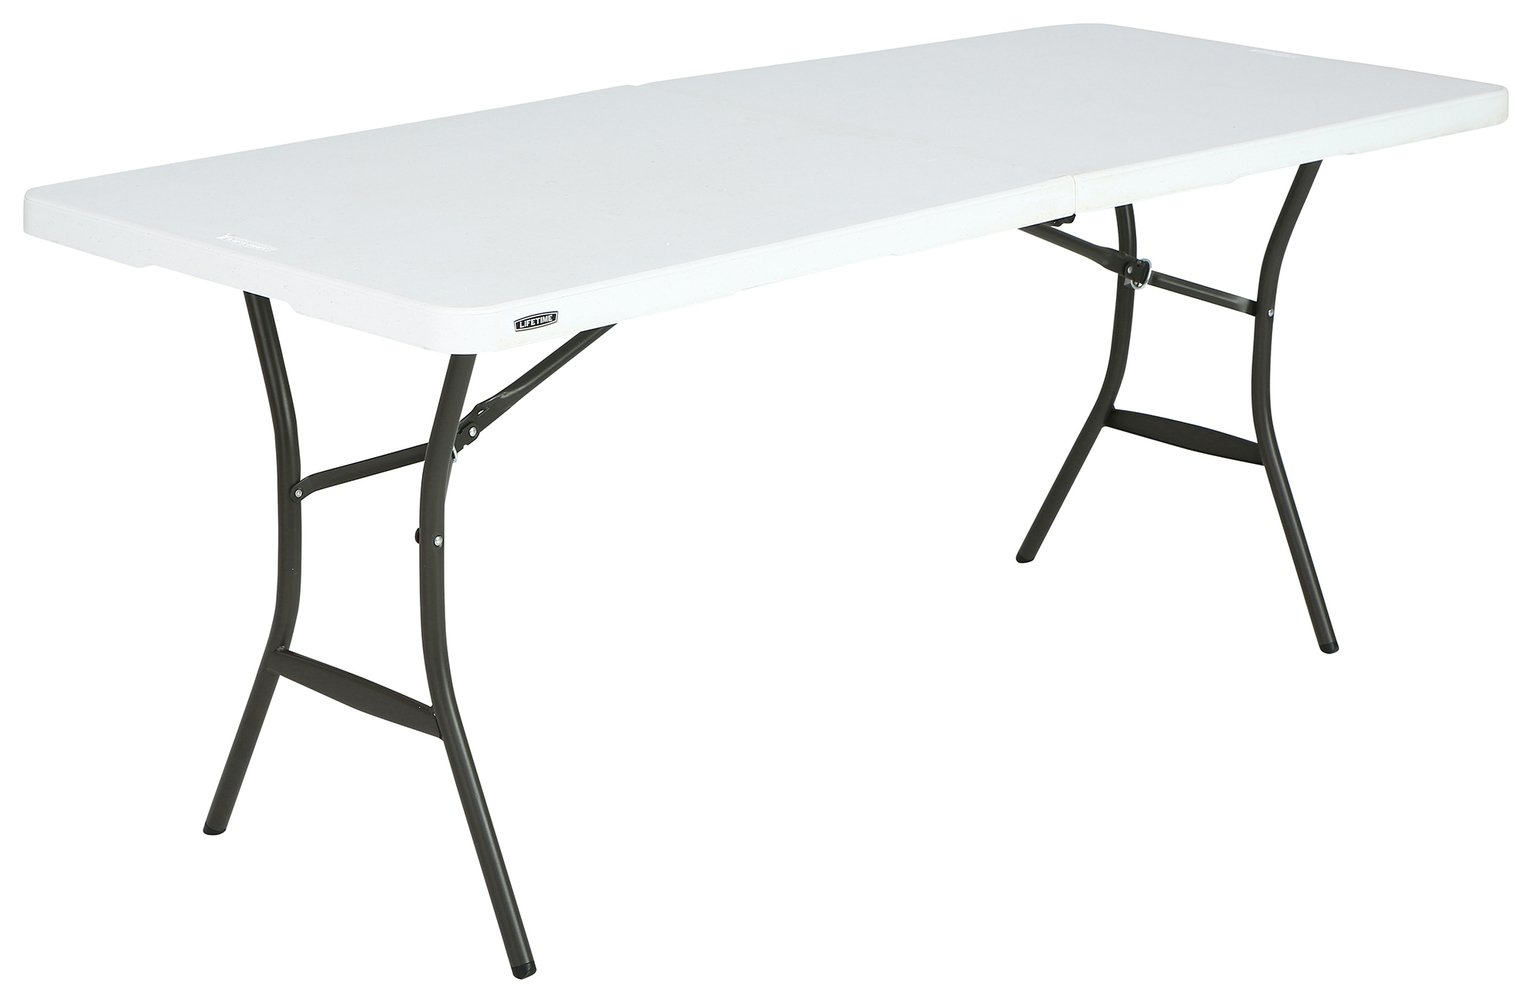 Lifetime 6ft Folding Table at Argos review